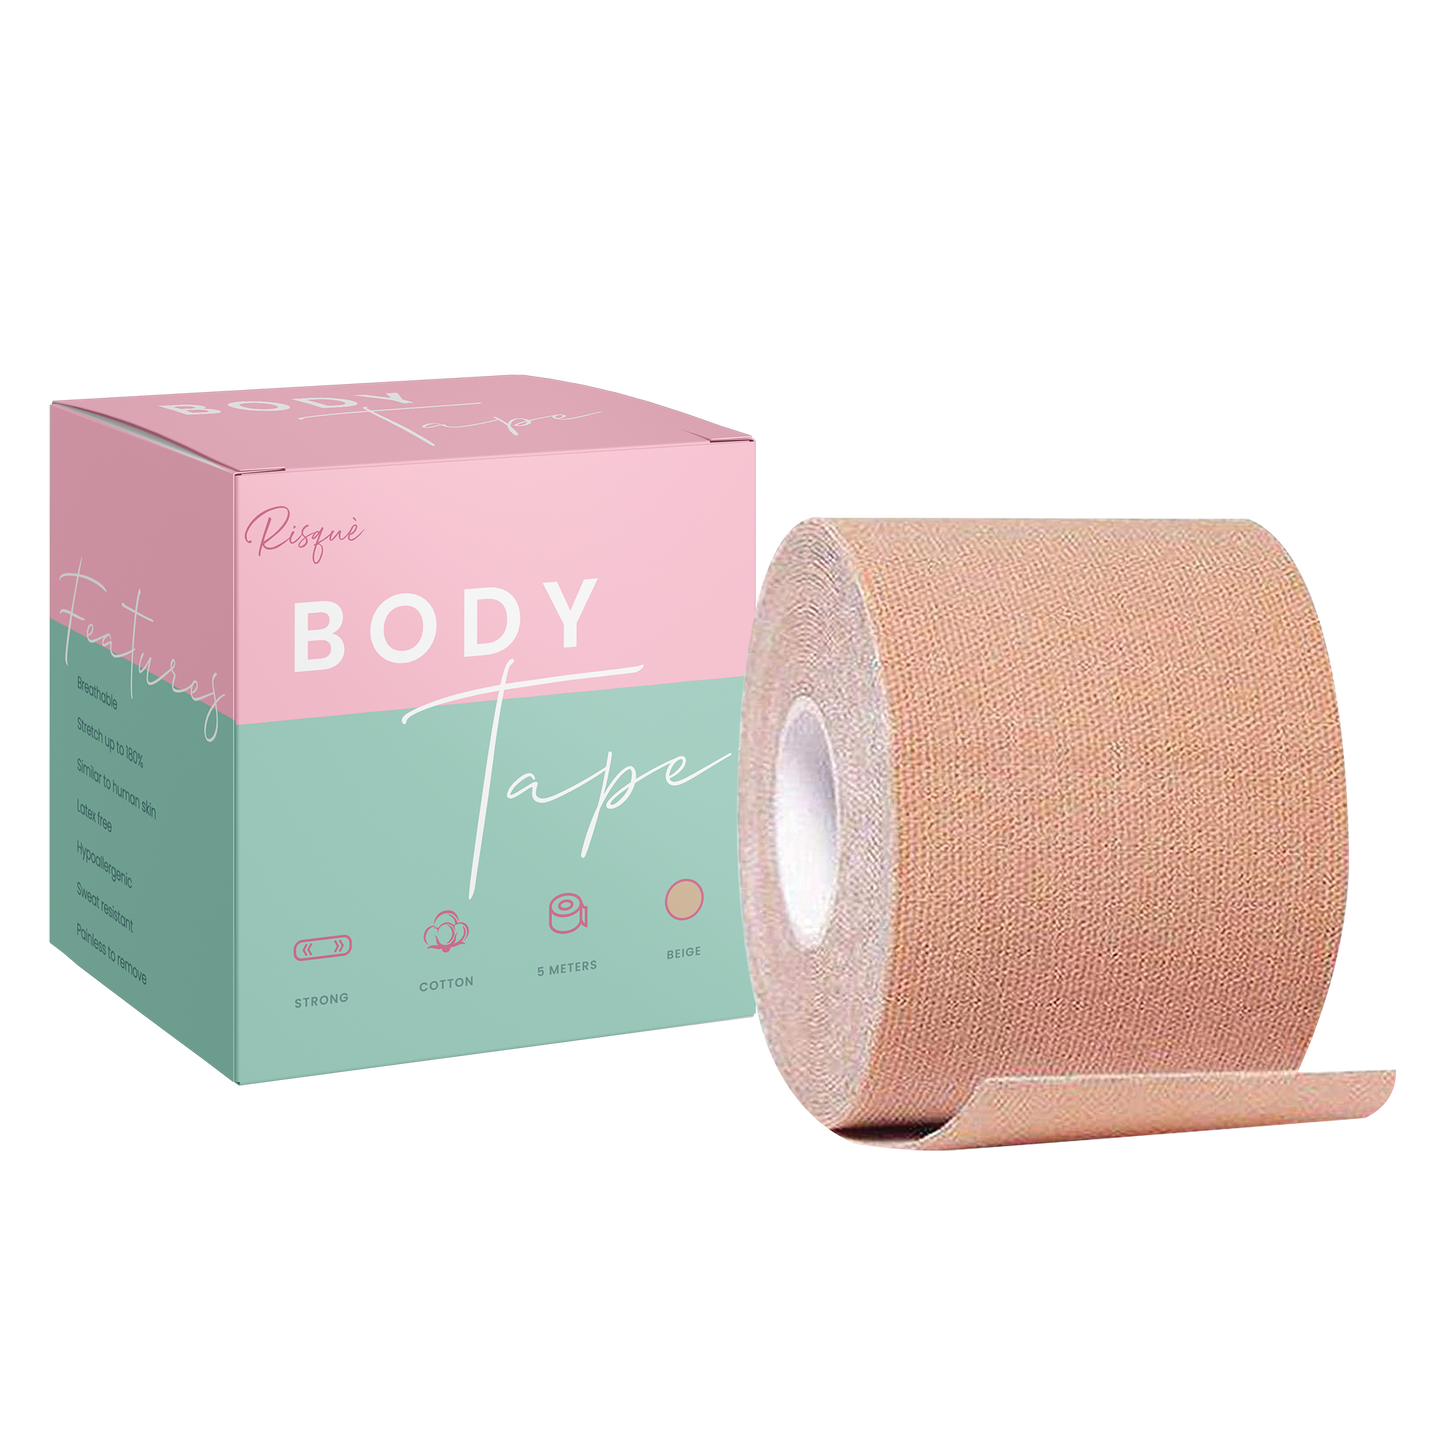 Booby Tape - The Original Breast Tape for Women, Latex-Free and Waterproof  Boob Tape Roll, Painless Body Tape for Breast, Reliable Bra Tape for Boob  Lift of Any Size, Black, 5-Meter Roll 